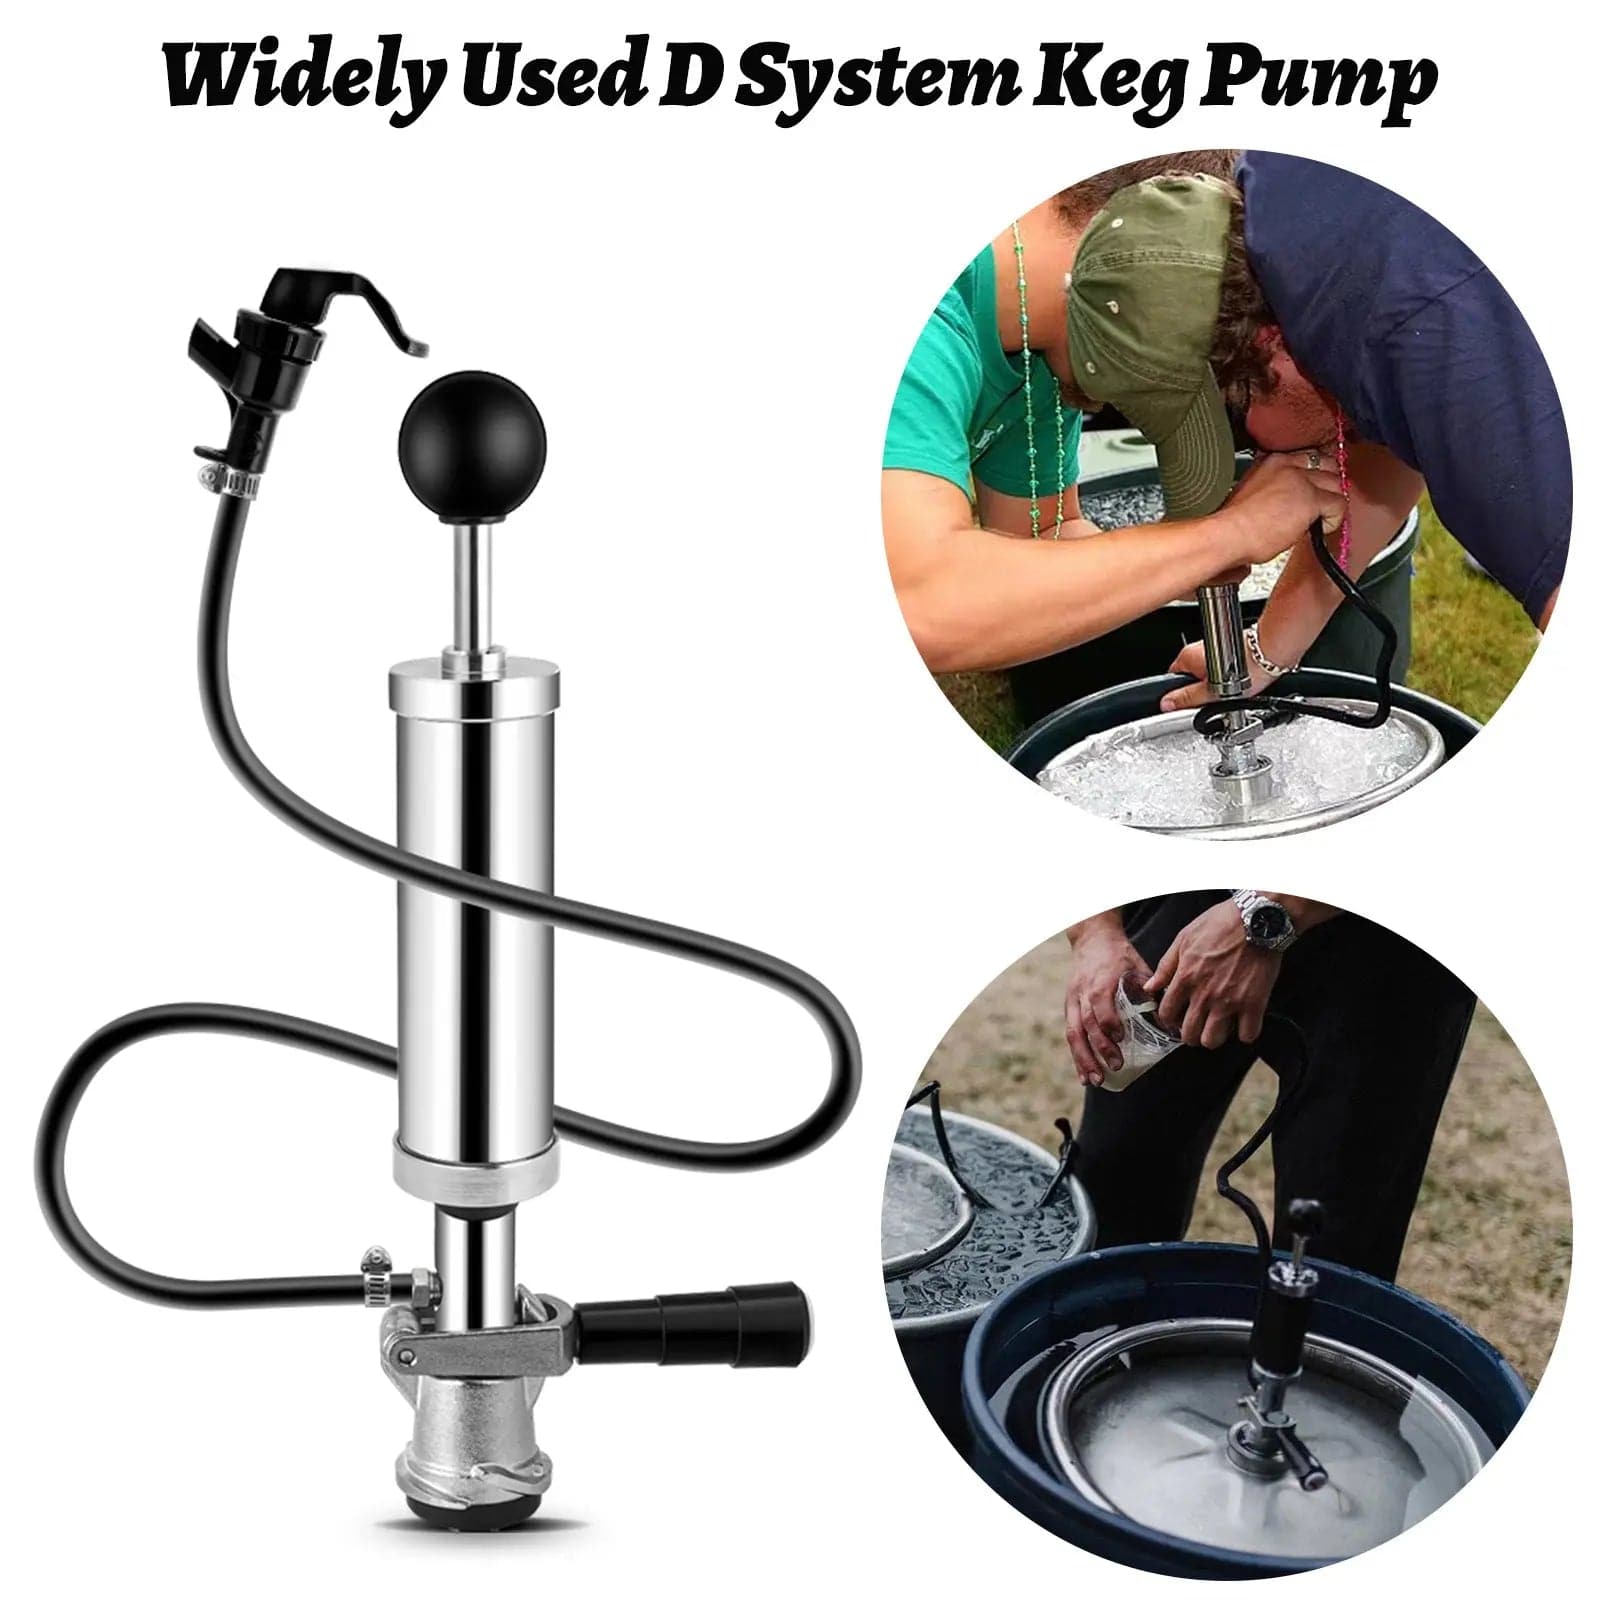 tmcraft 4 inch beer keg party pump show photo